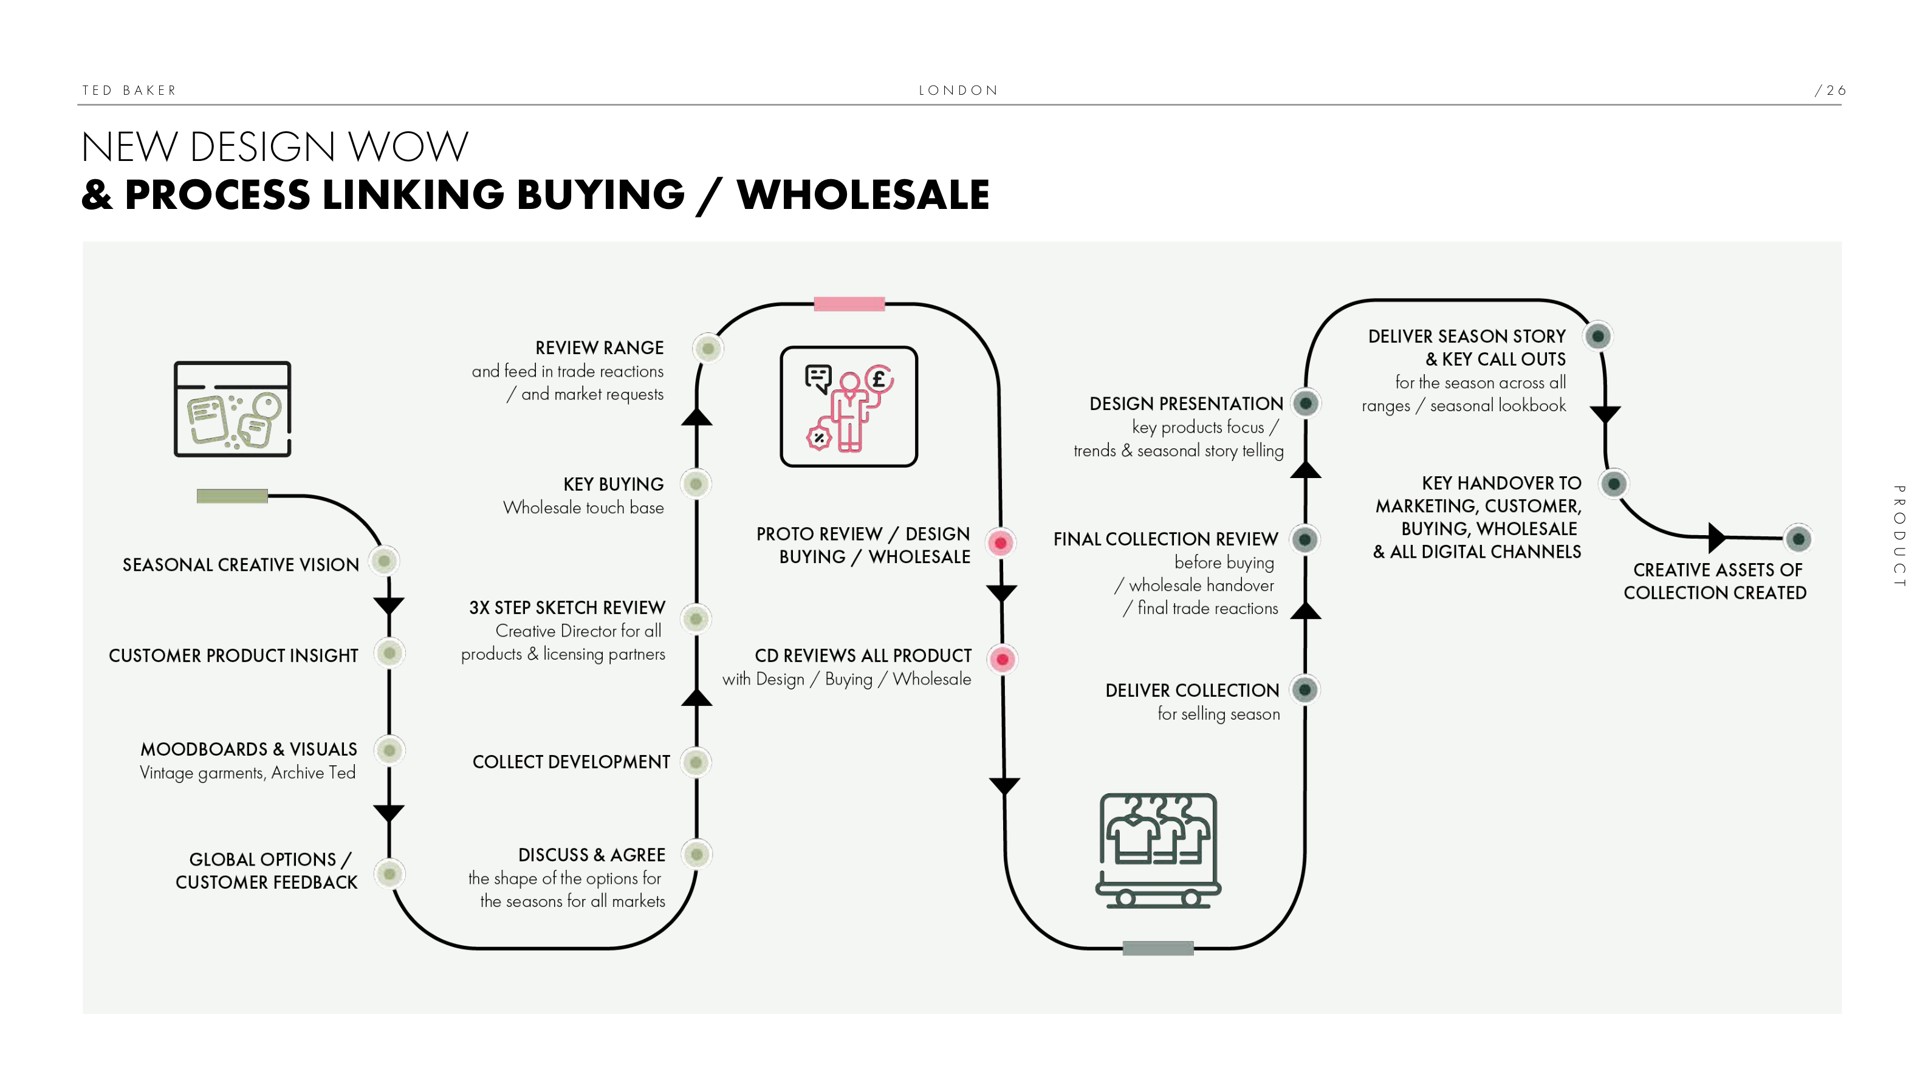 new design wow process linking buying wholesale before creative assets of | Ted Baker